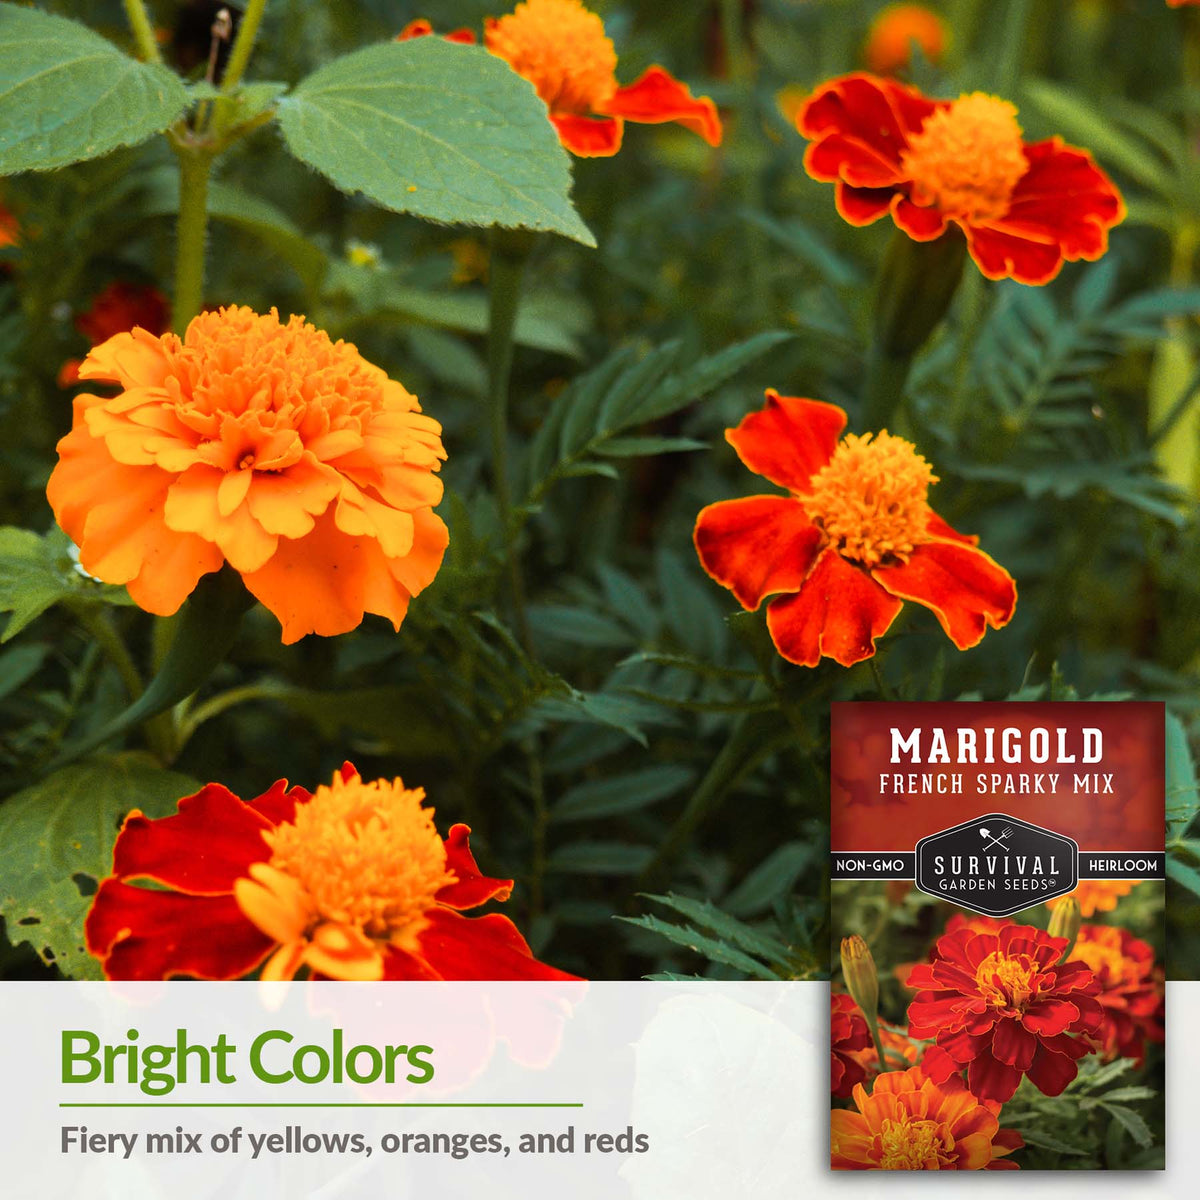 French Sparky Mix Marigolds are a fiery mix of yellows, oranges and reds